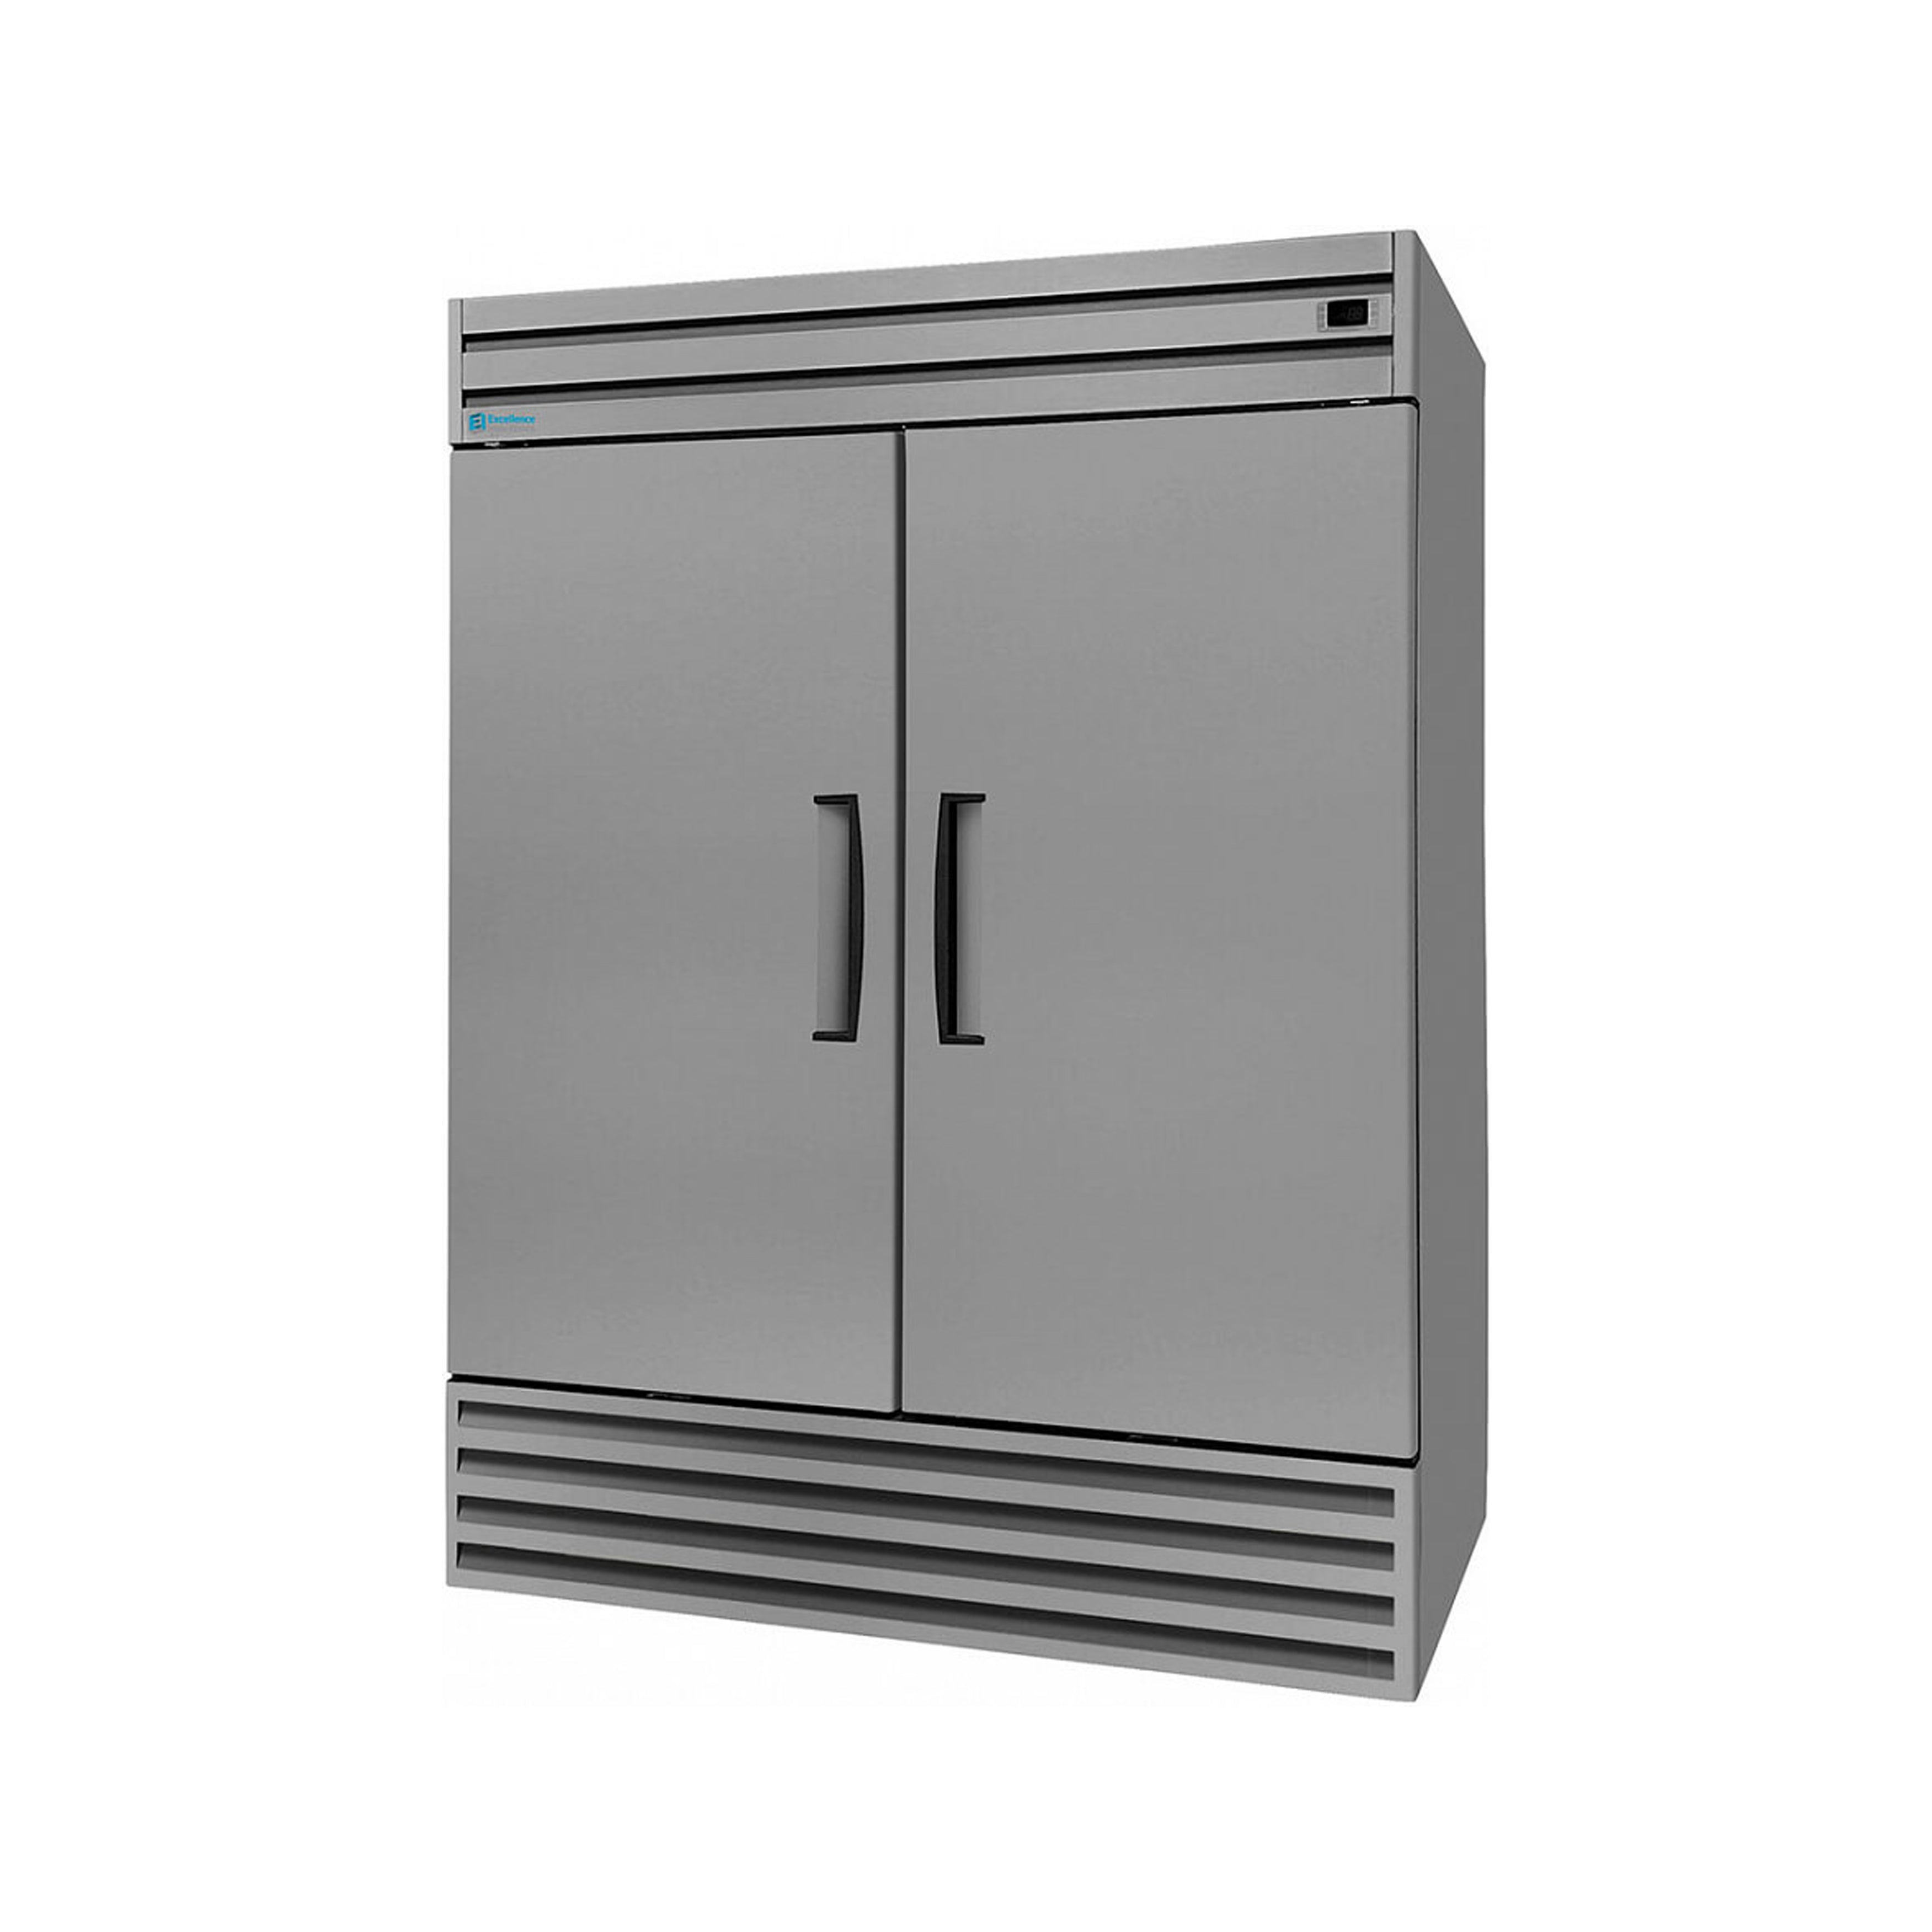 Excellence Industries - CR-43SSHC, 54" Commercial Reach-In 2 Solid Door Refrigerator 43 cu.ft.